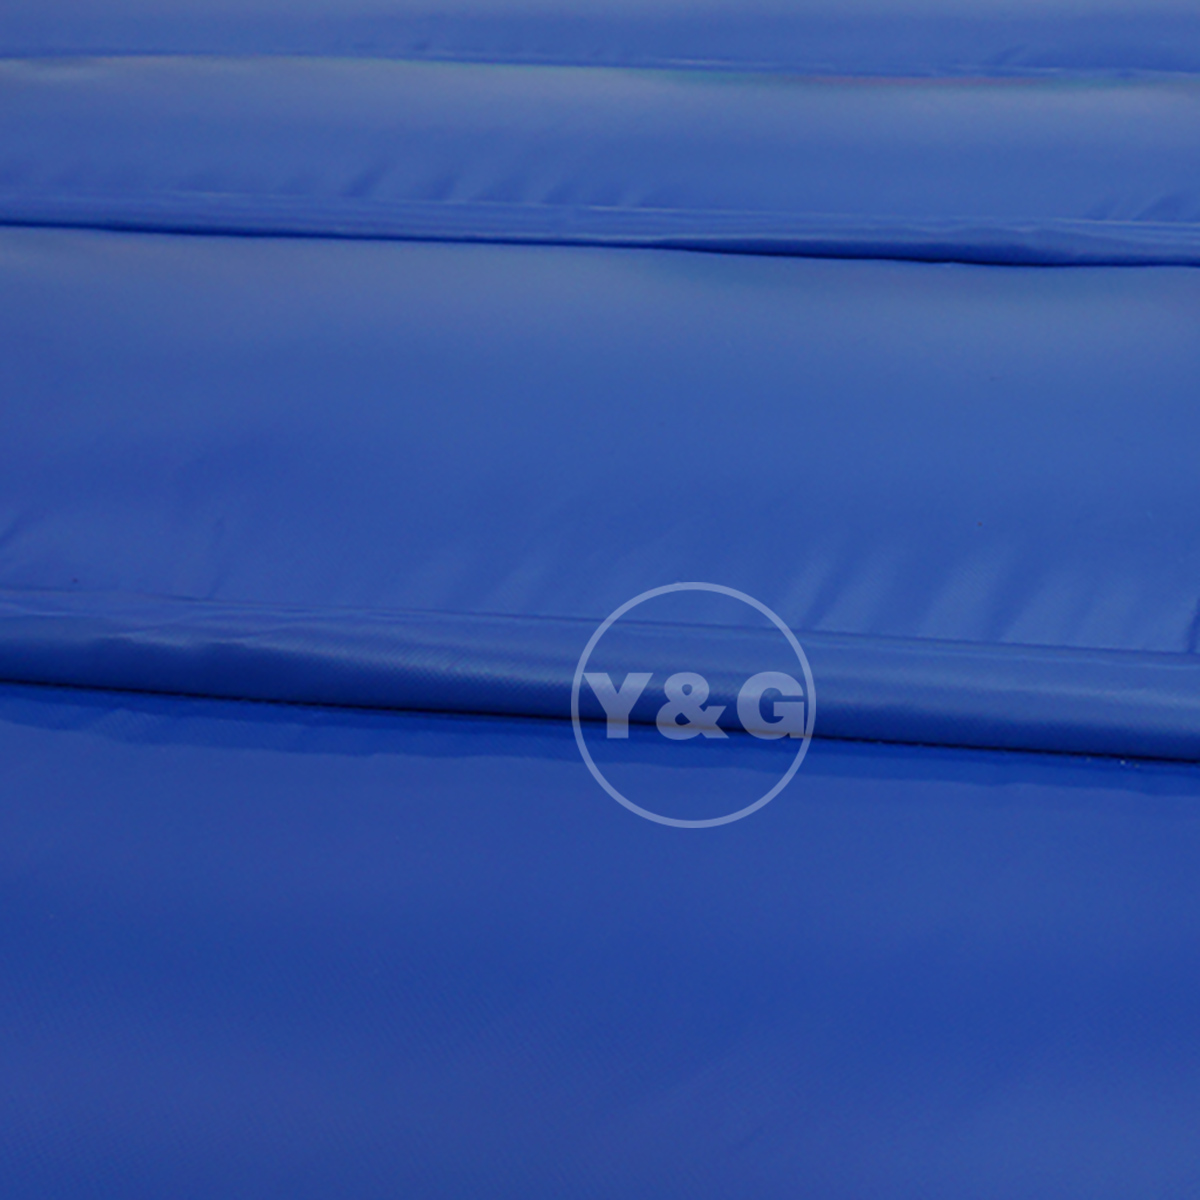 High Quality Inflatable Mat10